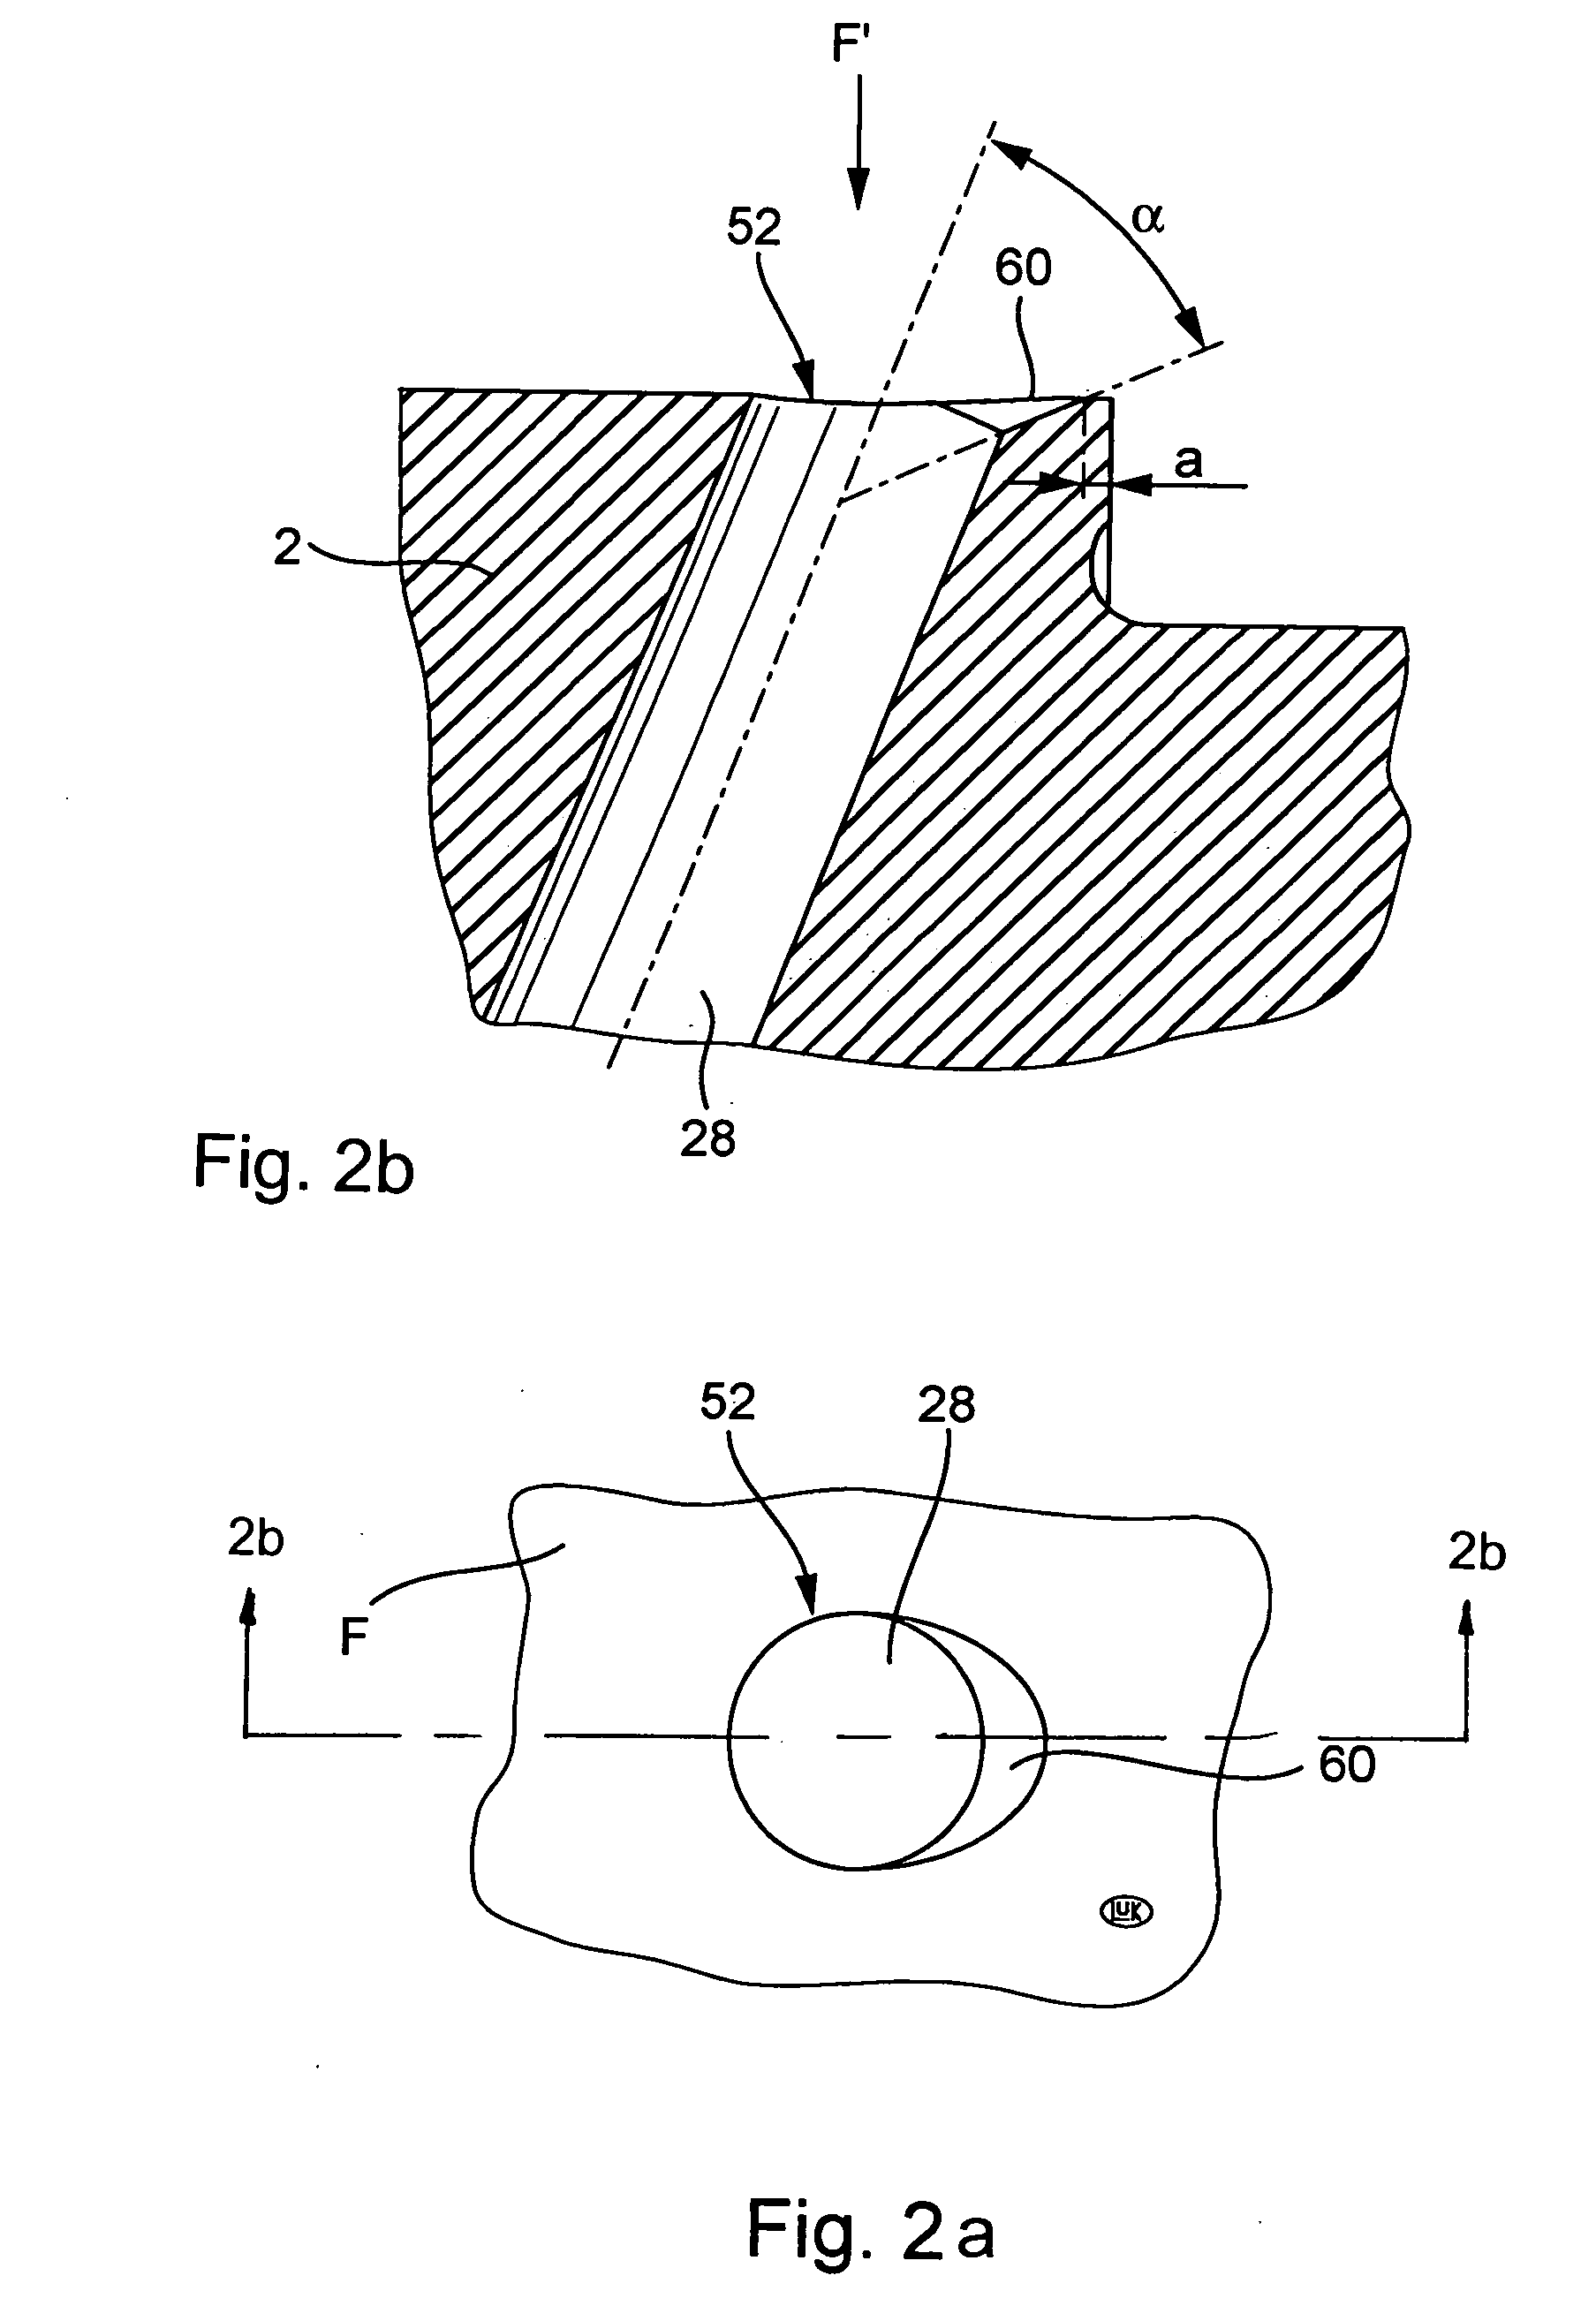 Belt-driven conical-pulley transmission